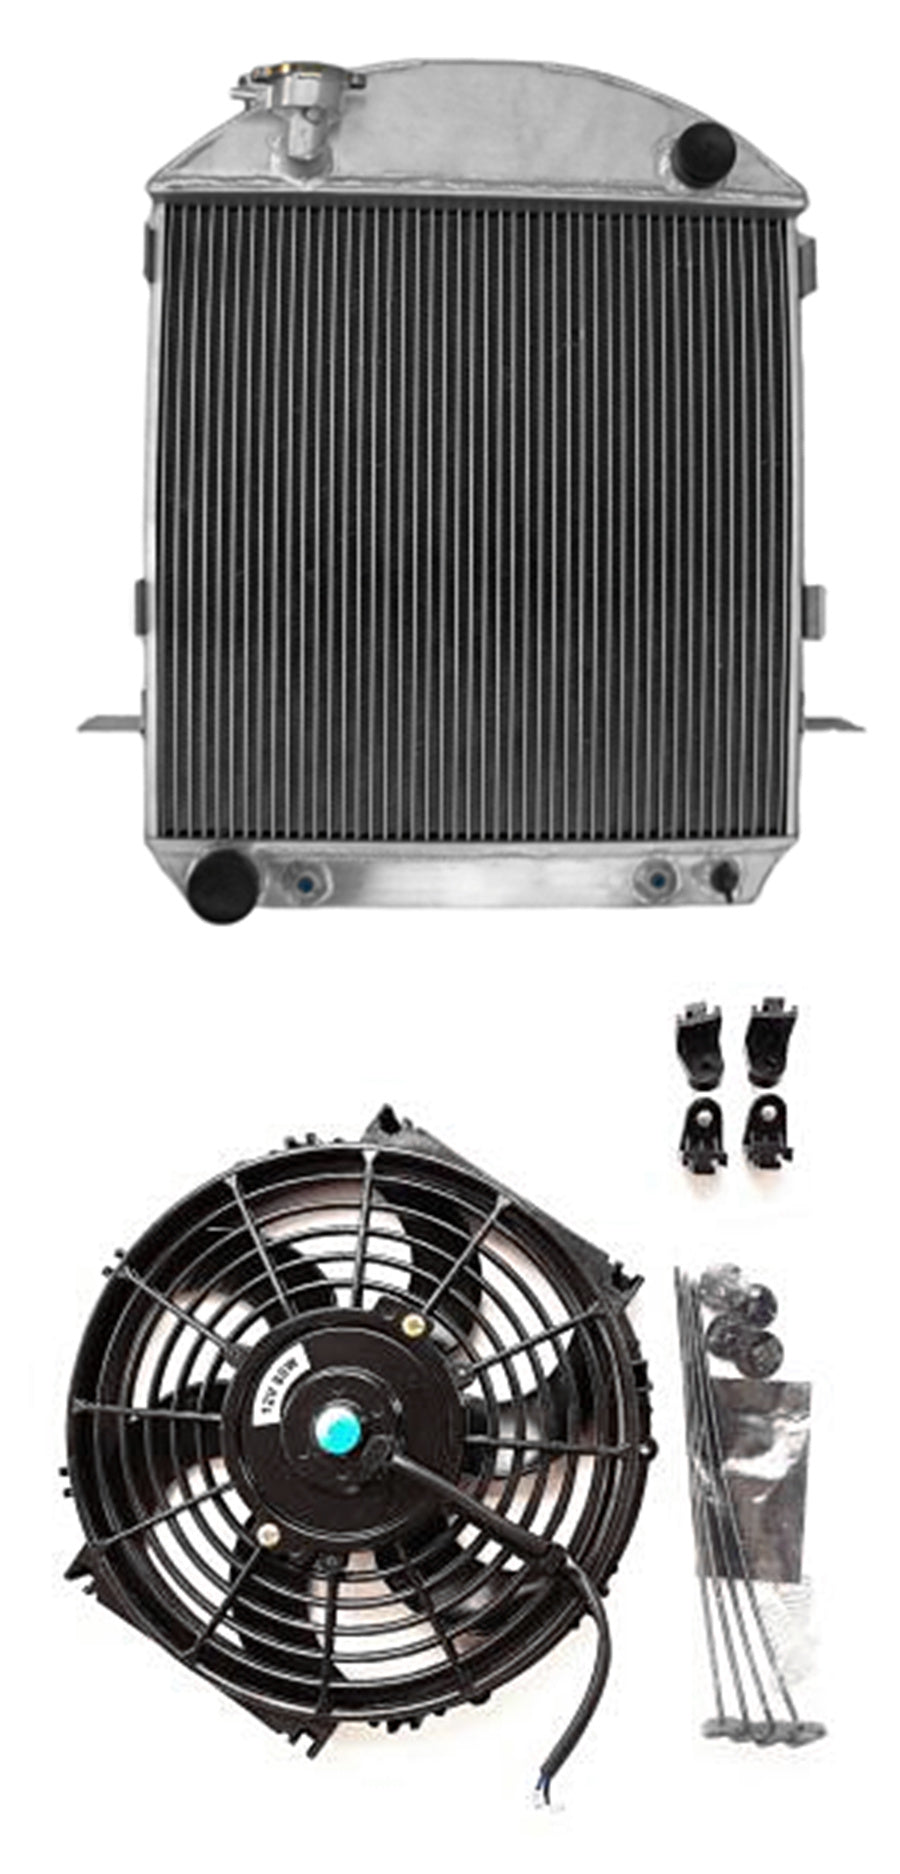 GPI 62mm 3 core Aluminum Radiator & FAN For 1917-1927 Ford Model T-Bucket Grill Shells AT  1917 1918 1919 1920 1921 1922 1923 1924 1925 1926 1927